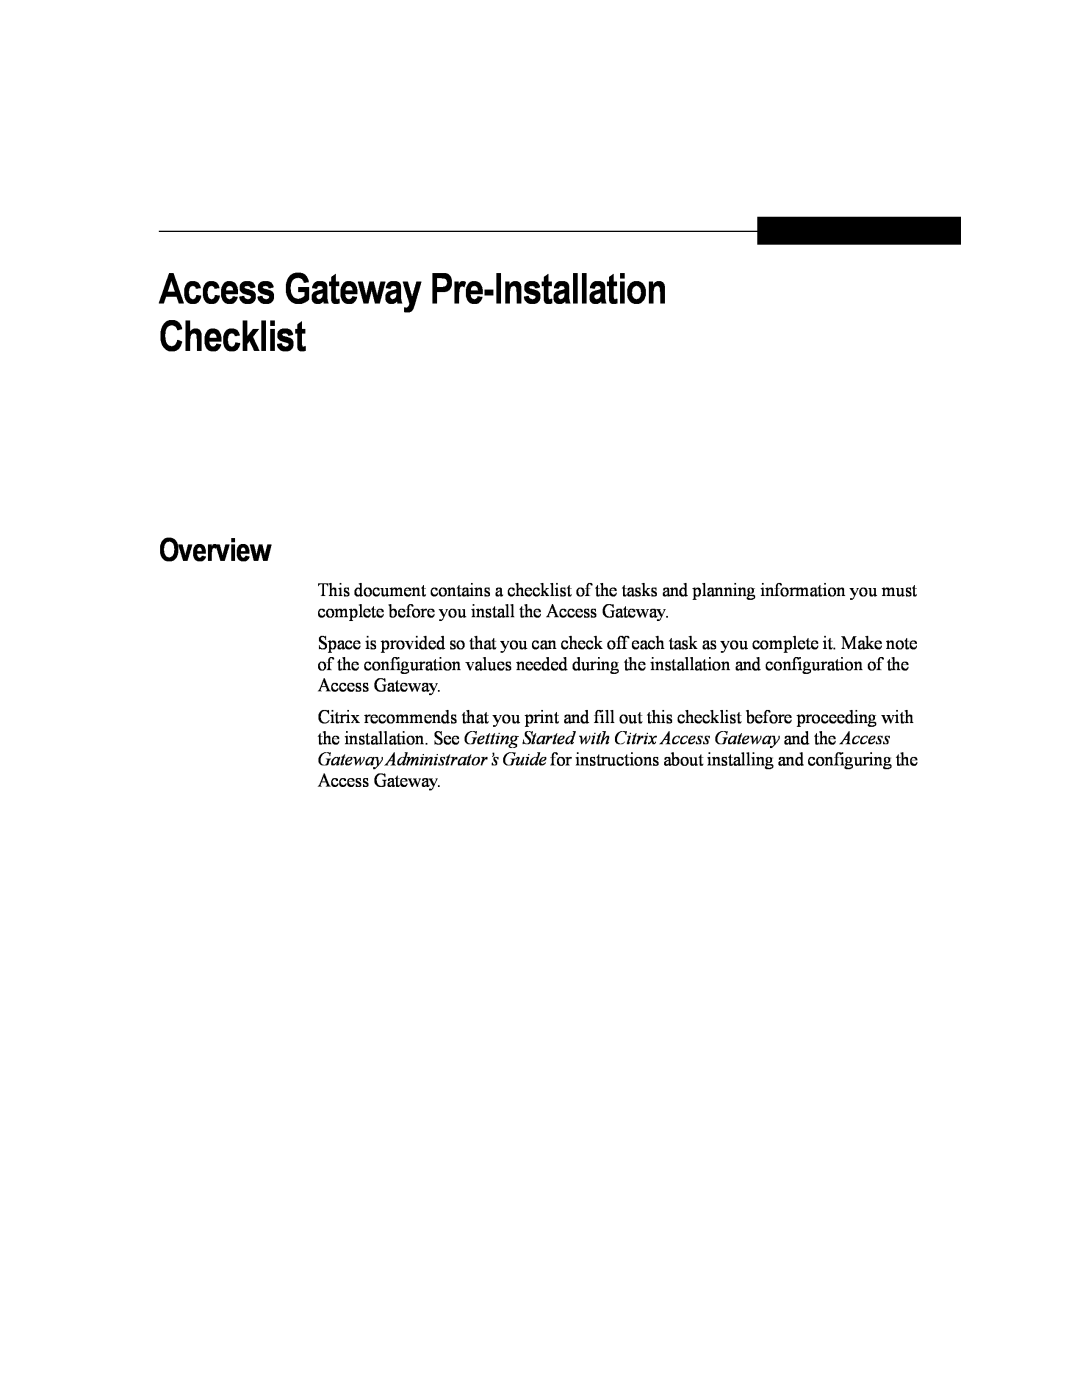 Citrix Systems 4.2 manual Overview, Access Gateway Pre-Installation Checklist 